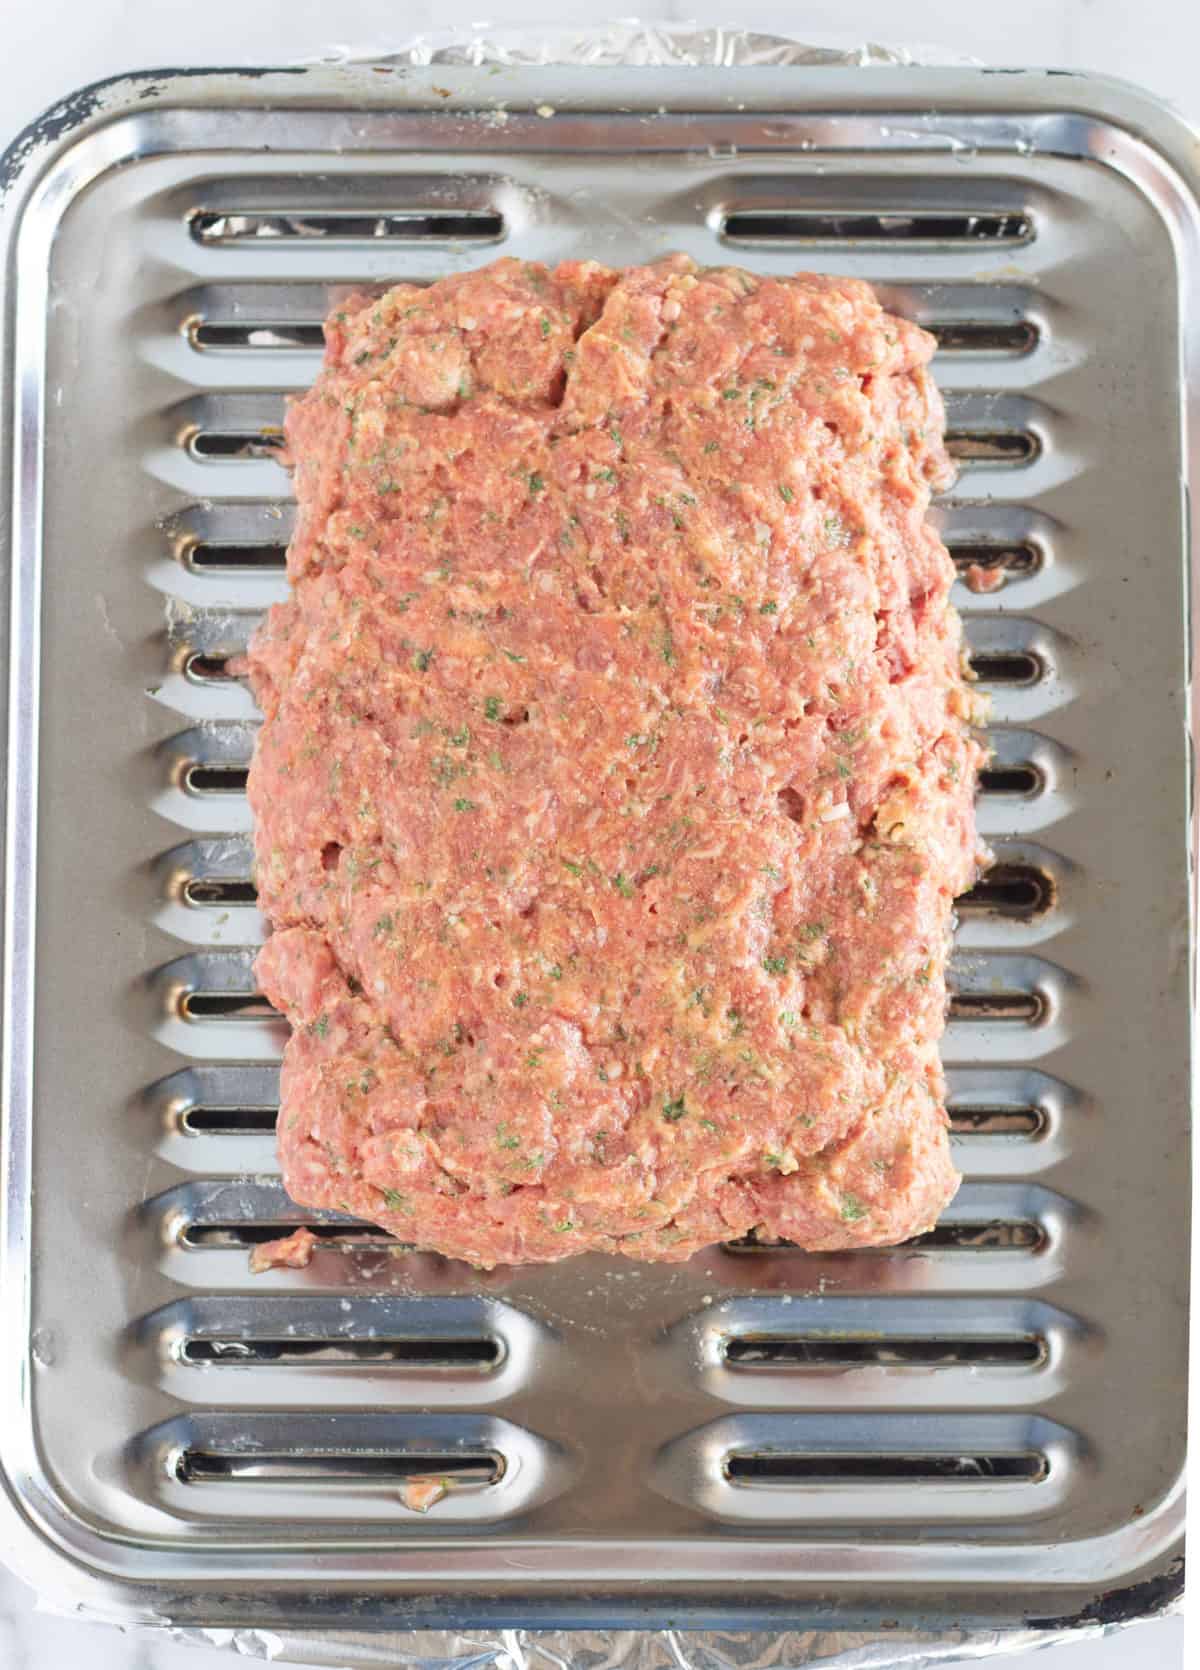 meat mixture formed into loaf on broiler pan